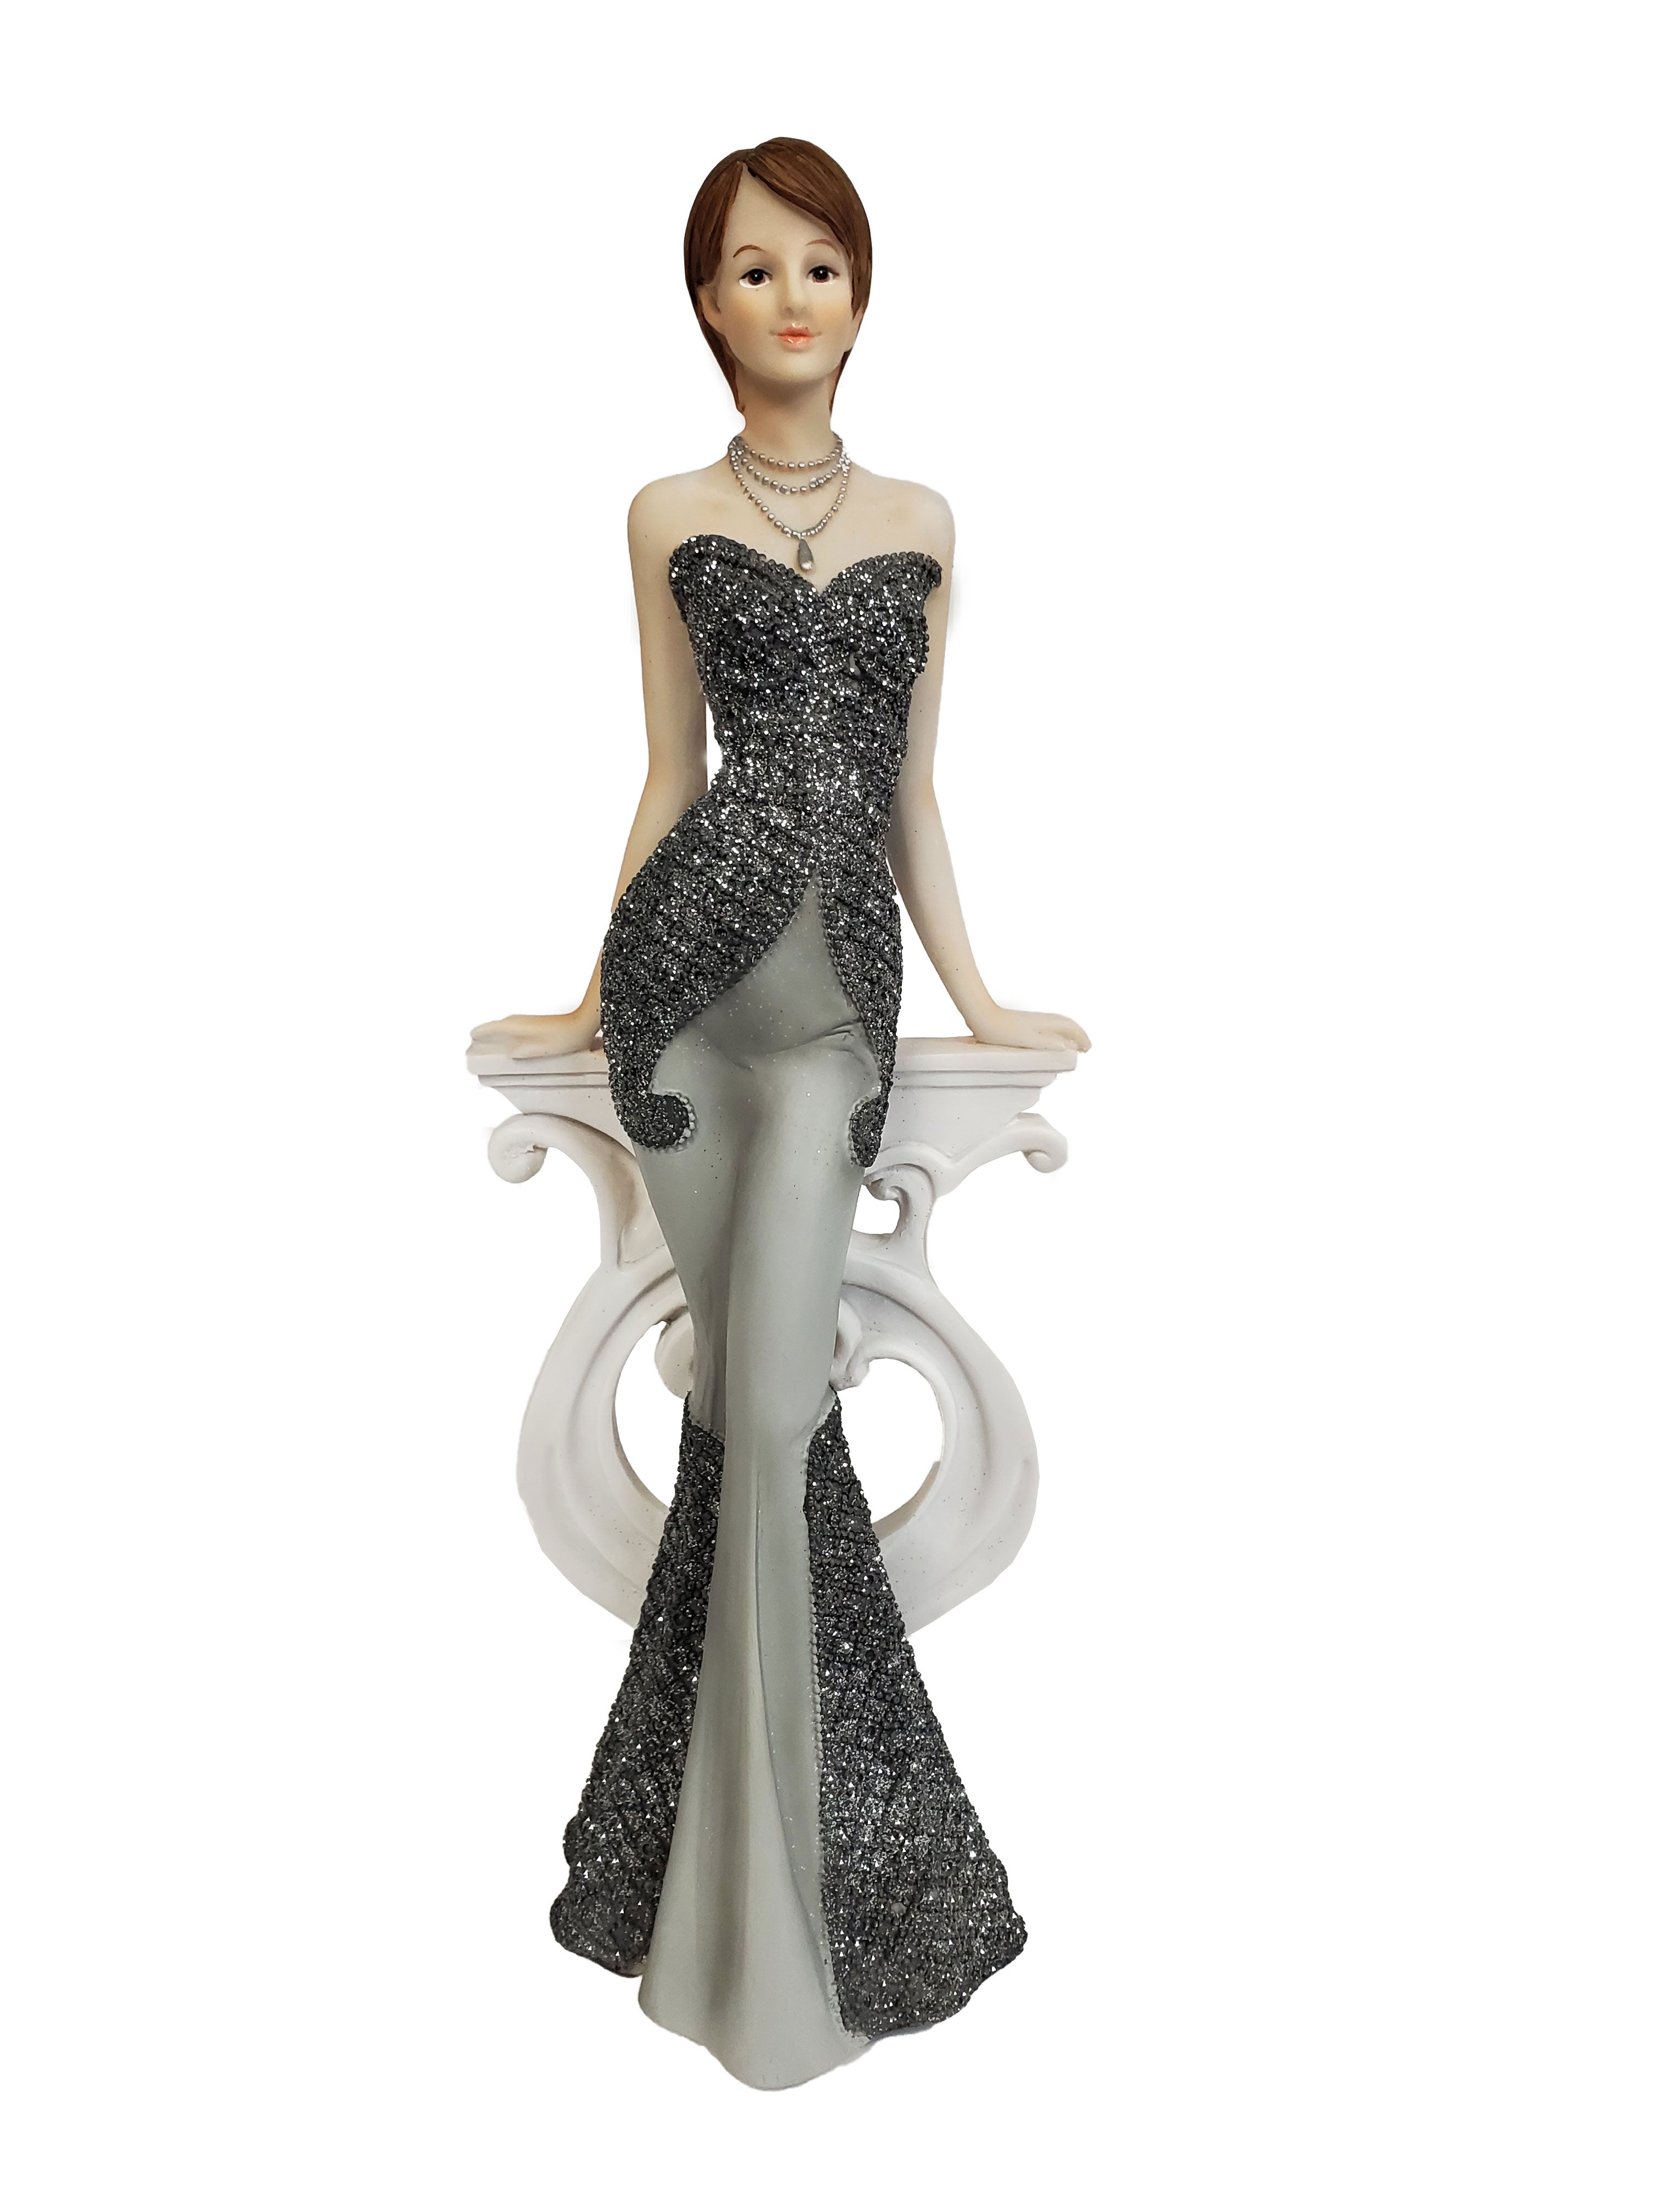 Lady in Sparkle Dress Figurine Ceramic 14" Tall - Royal Gift